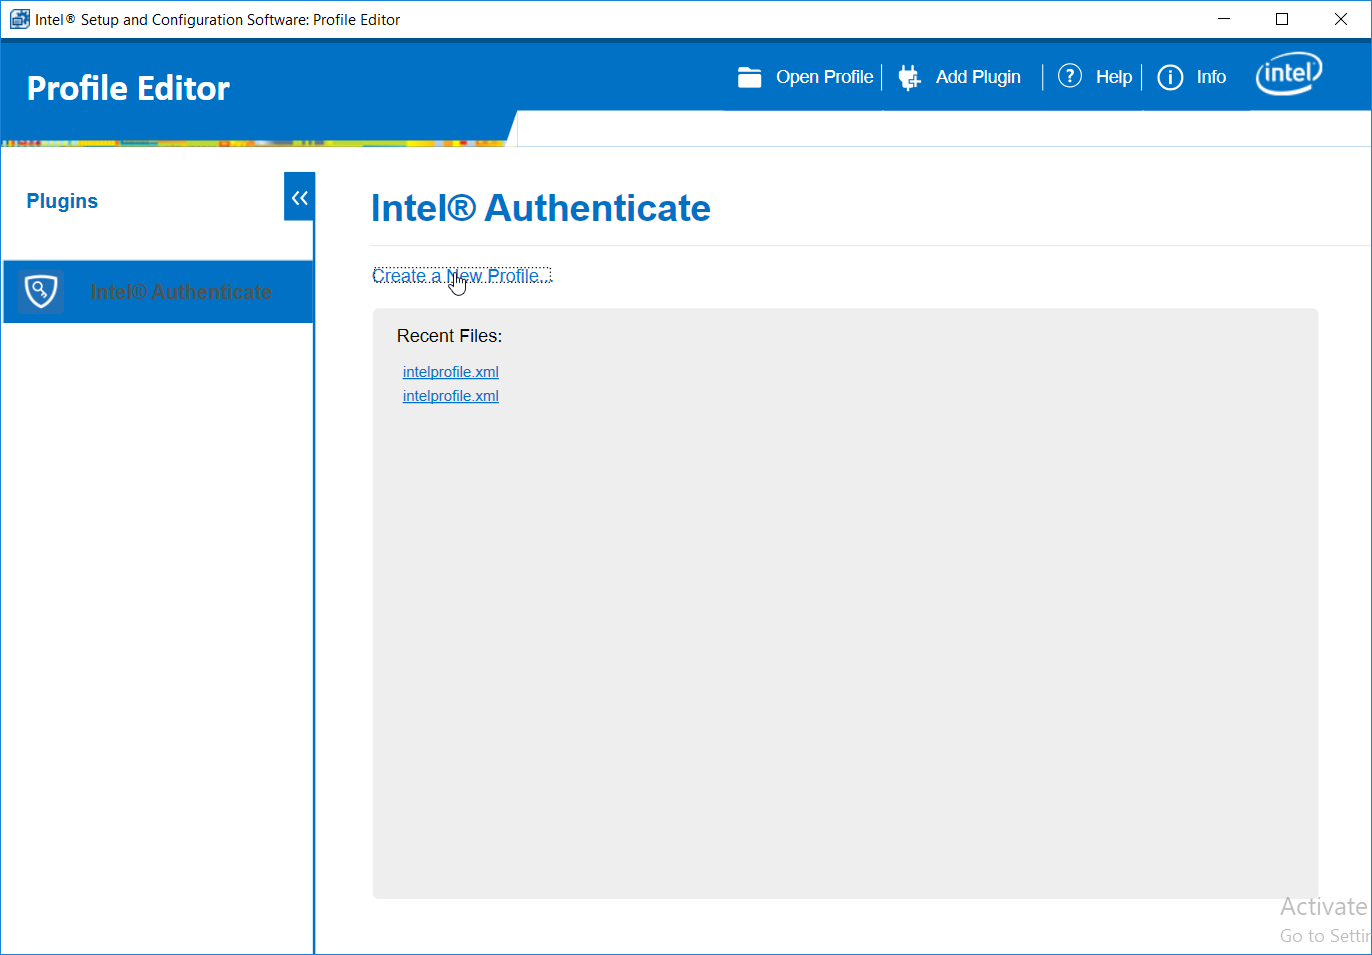 A screenshot of the Intel® Setup and Configuration Software: Profile Editor dialog box. The Create a New Profile link is selected.